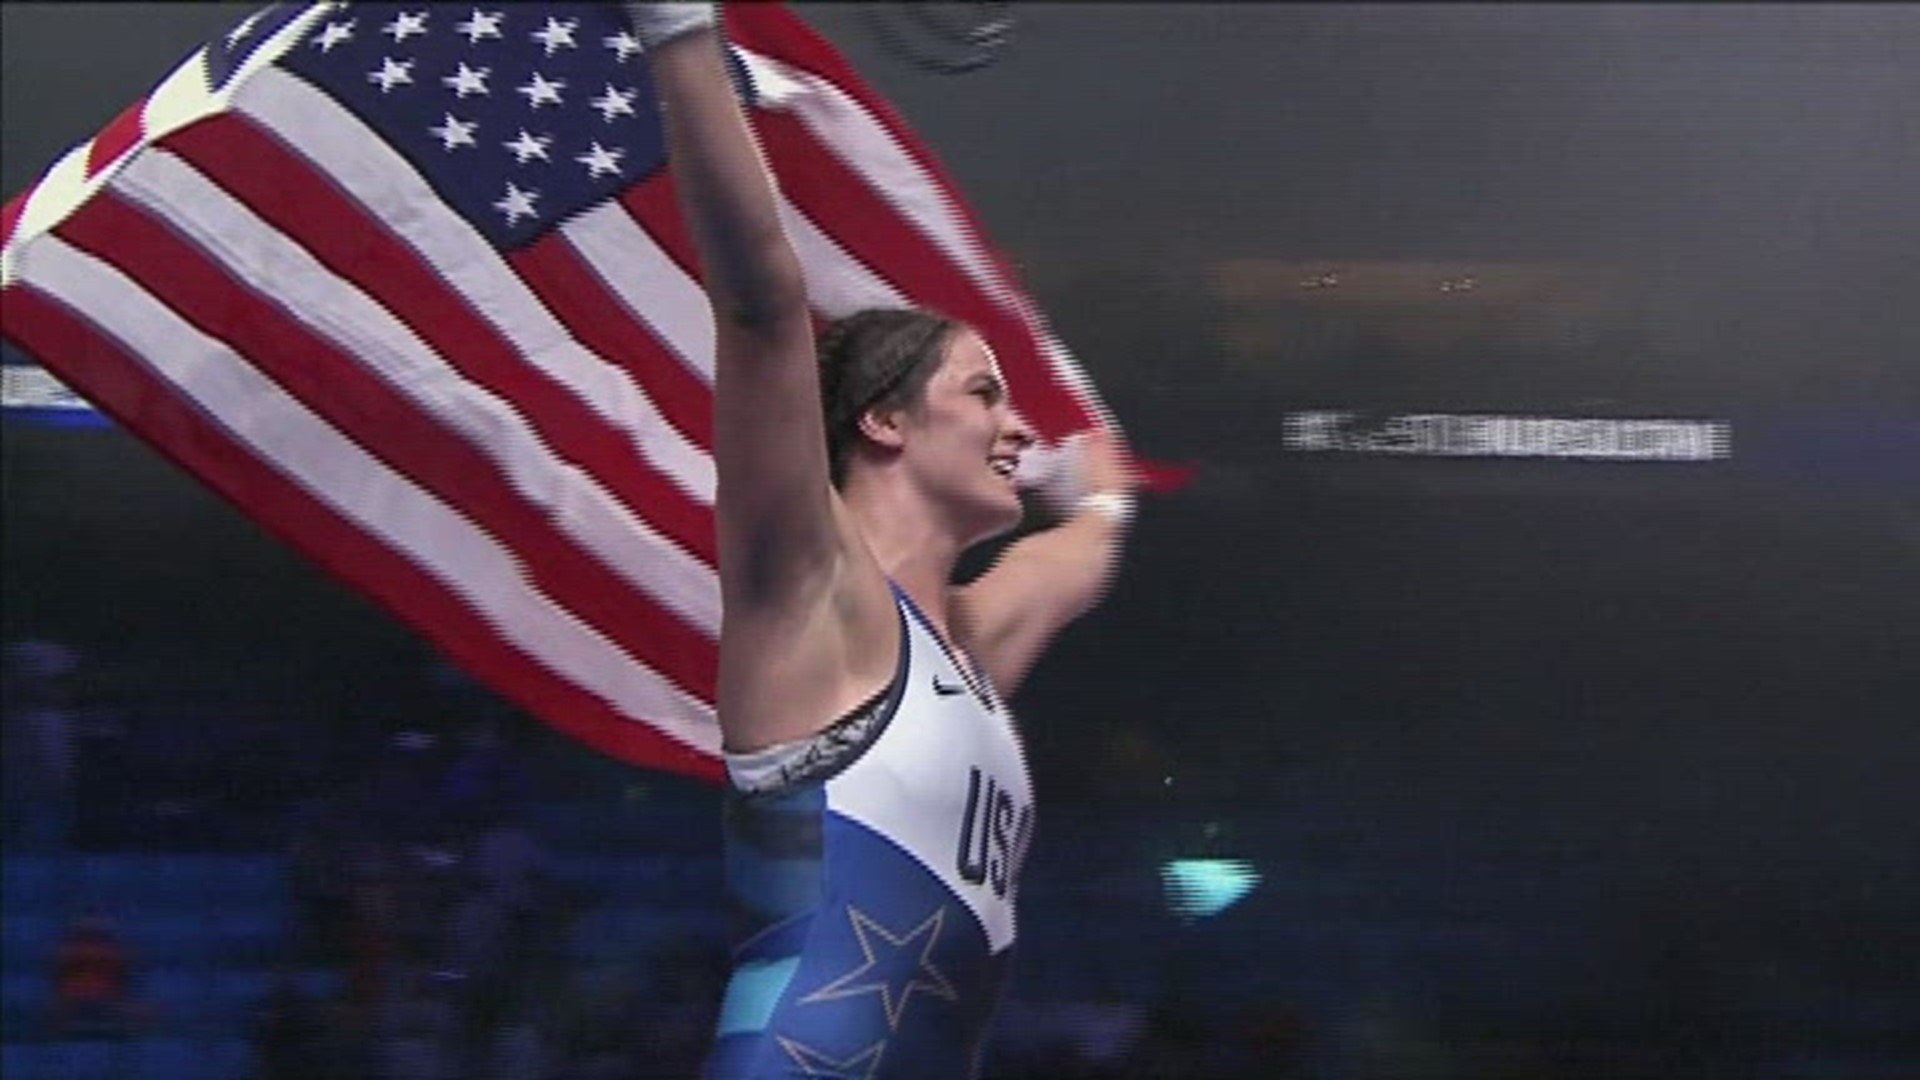 Adeline Gray is a five-time world champion in wrestling but heads to Tokyo still looking for her first Olympic medal.